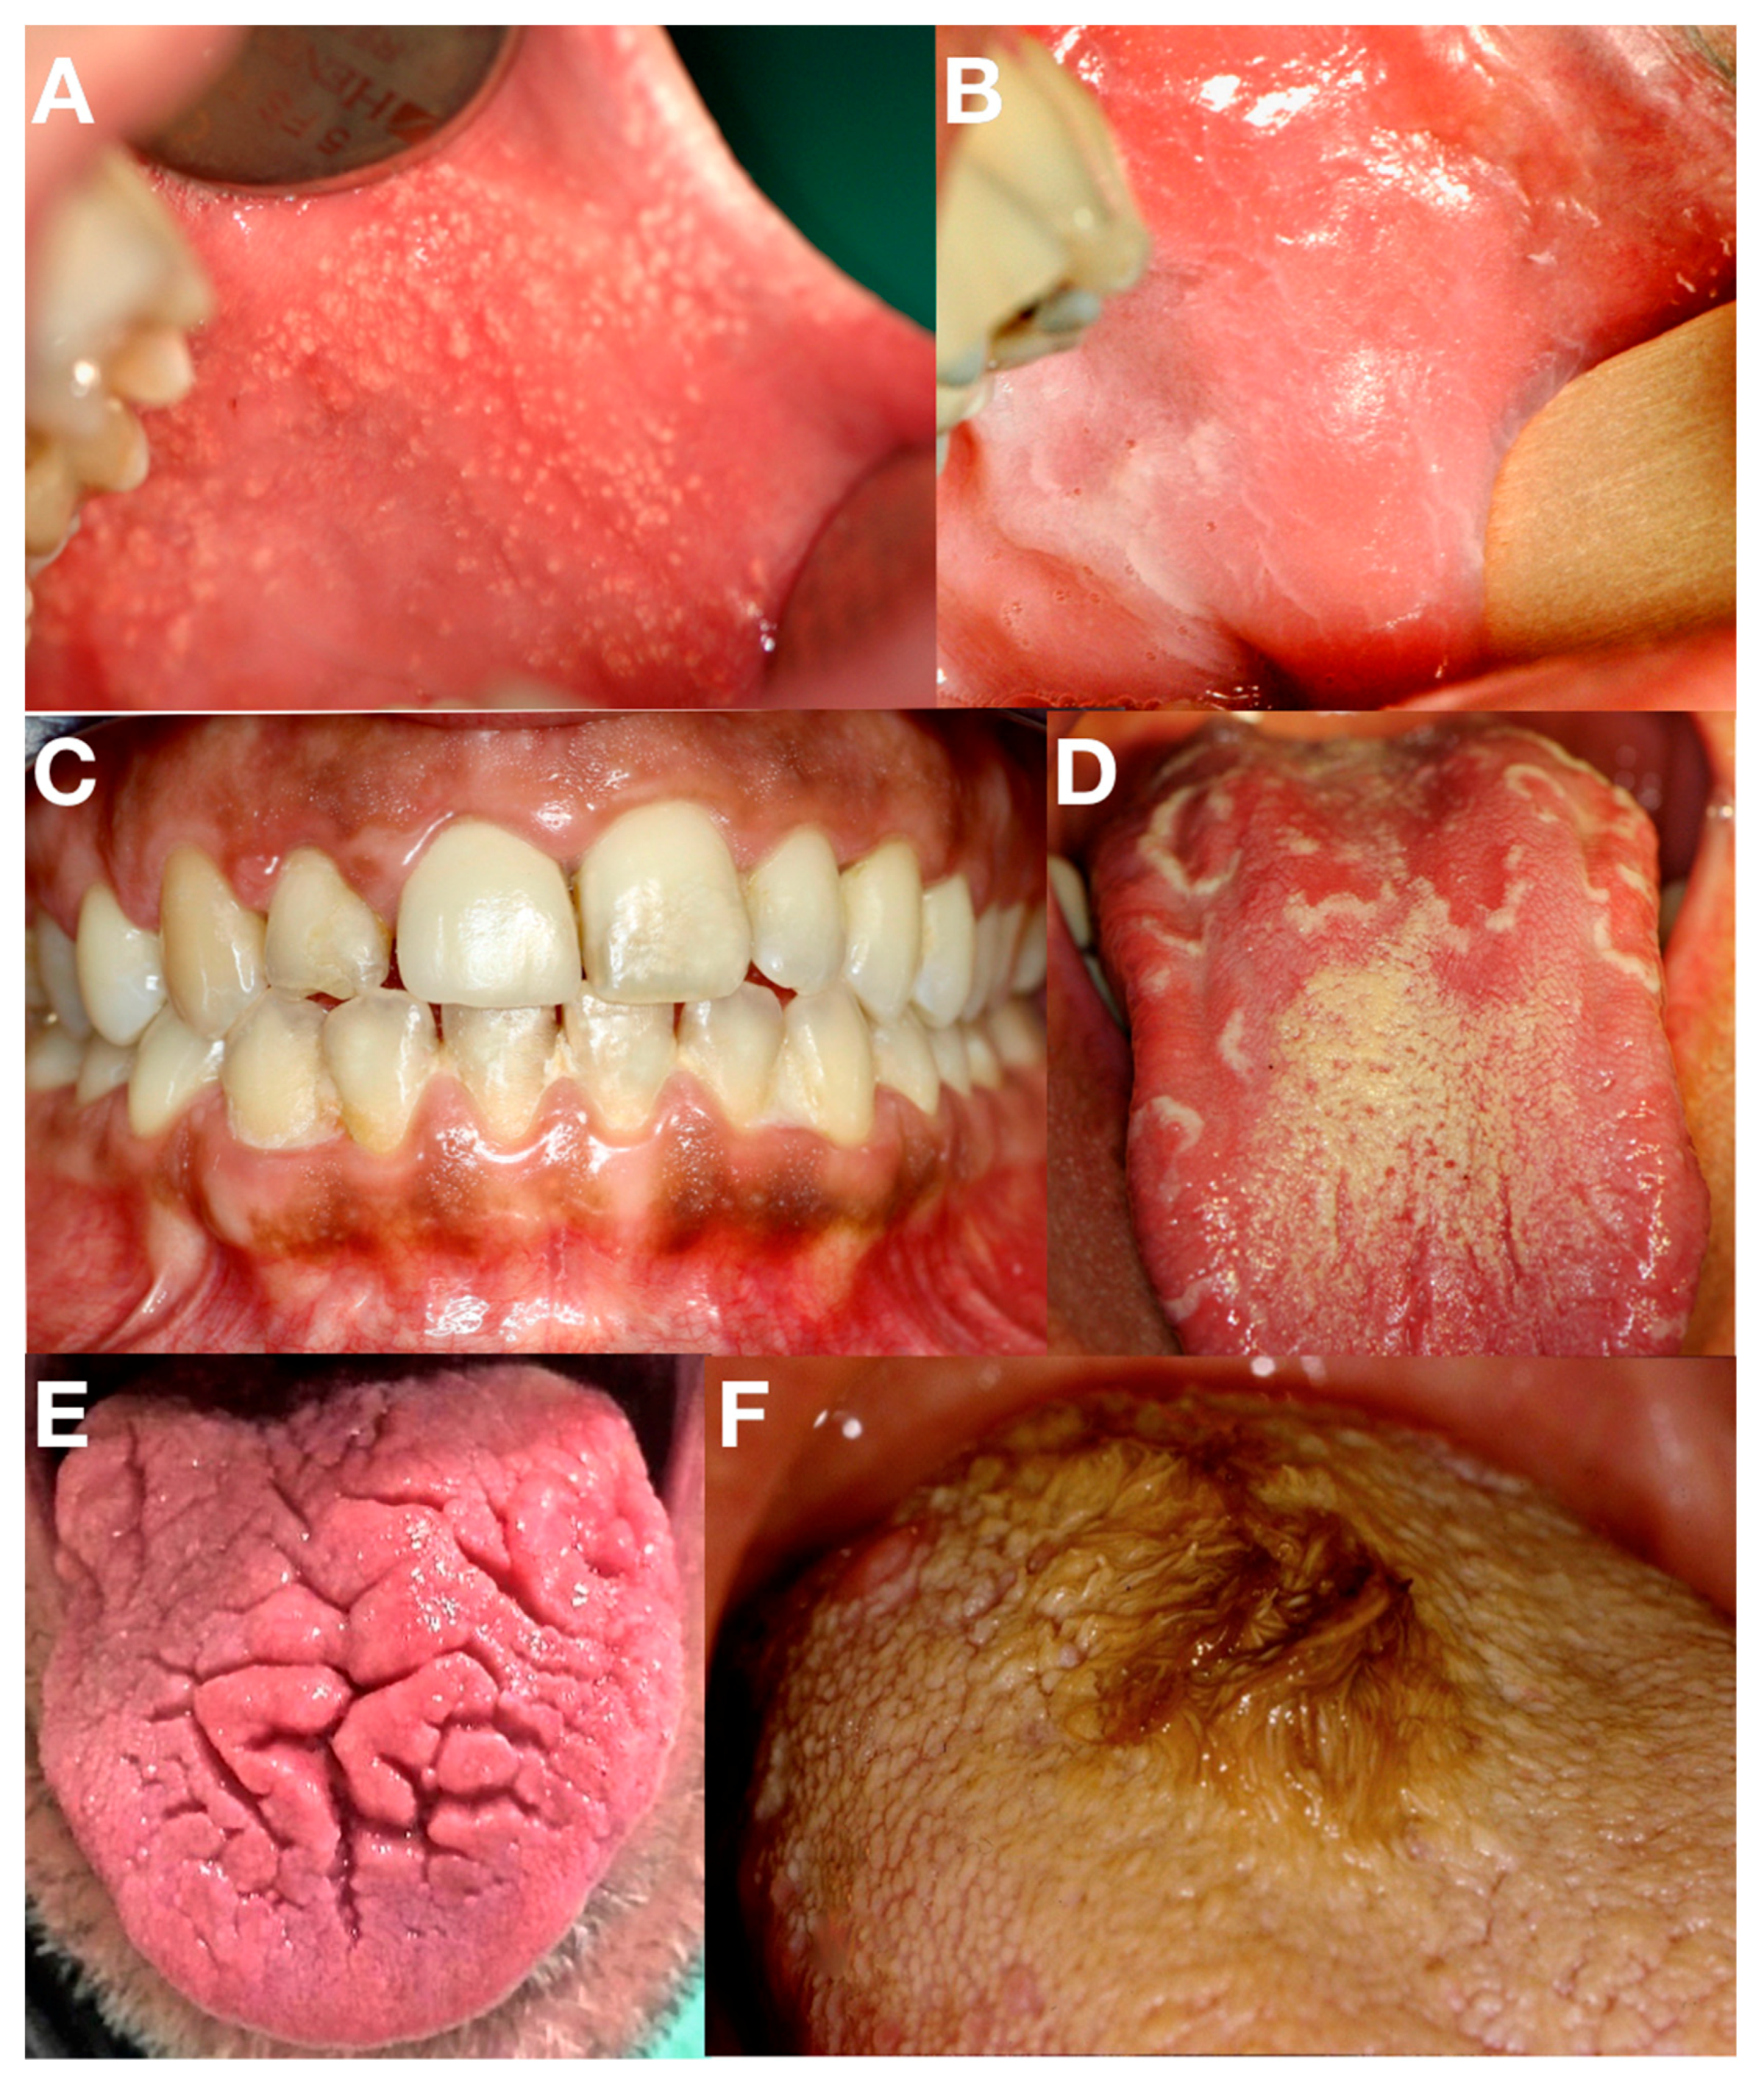 Oral exam: damage caused by lip sucking | Registered Dental Hygienists